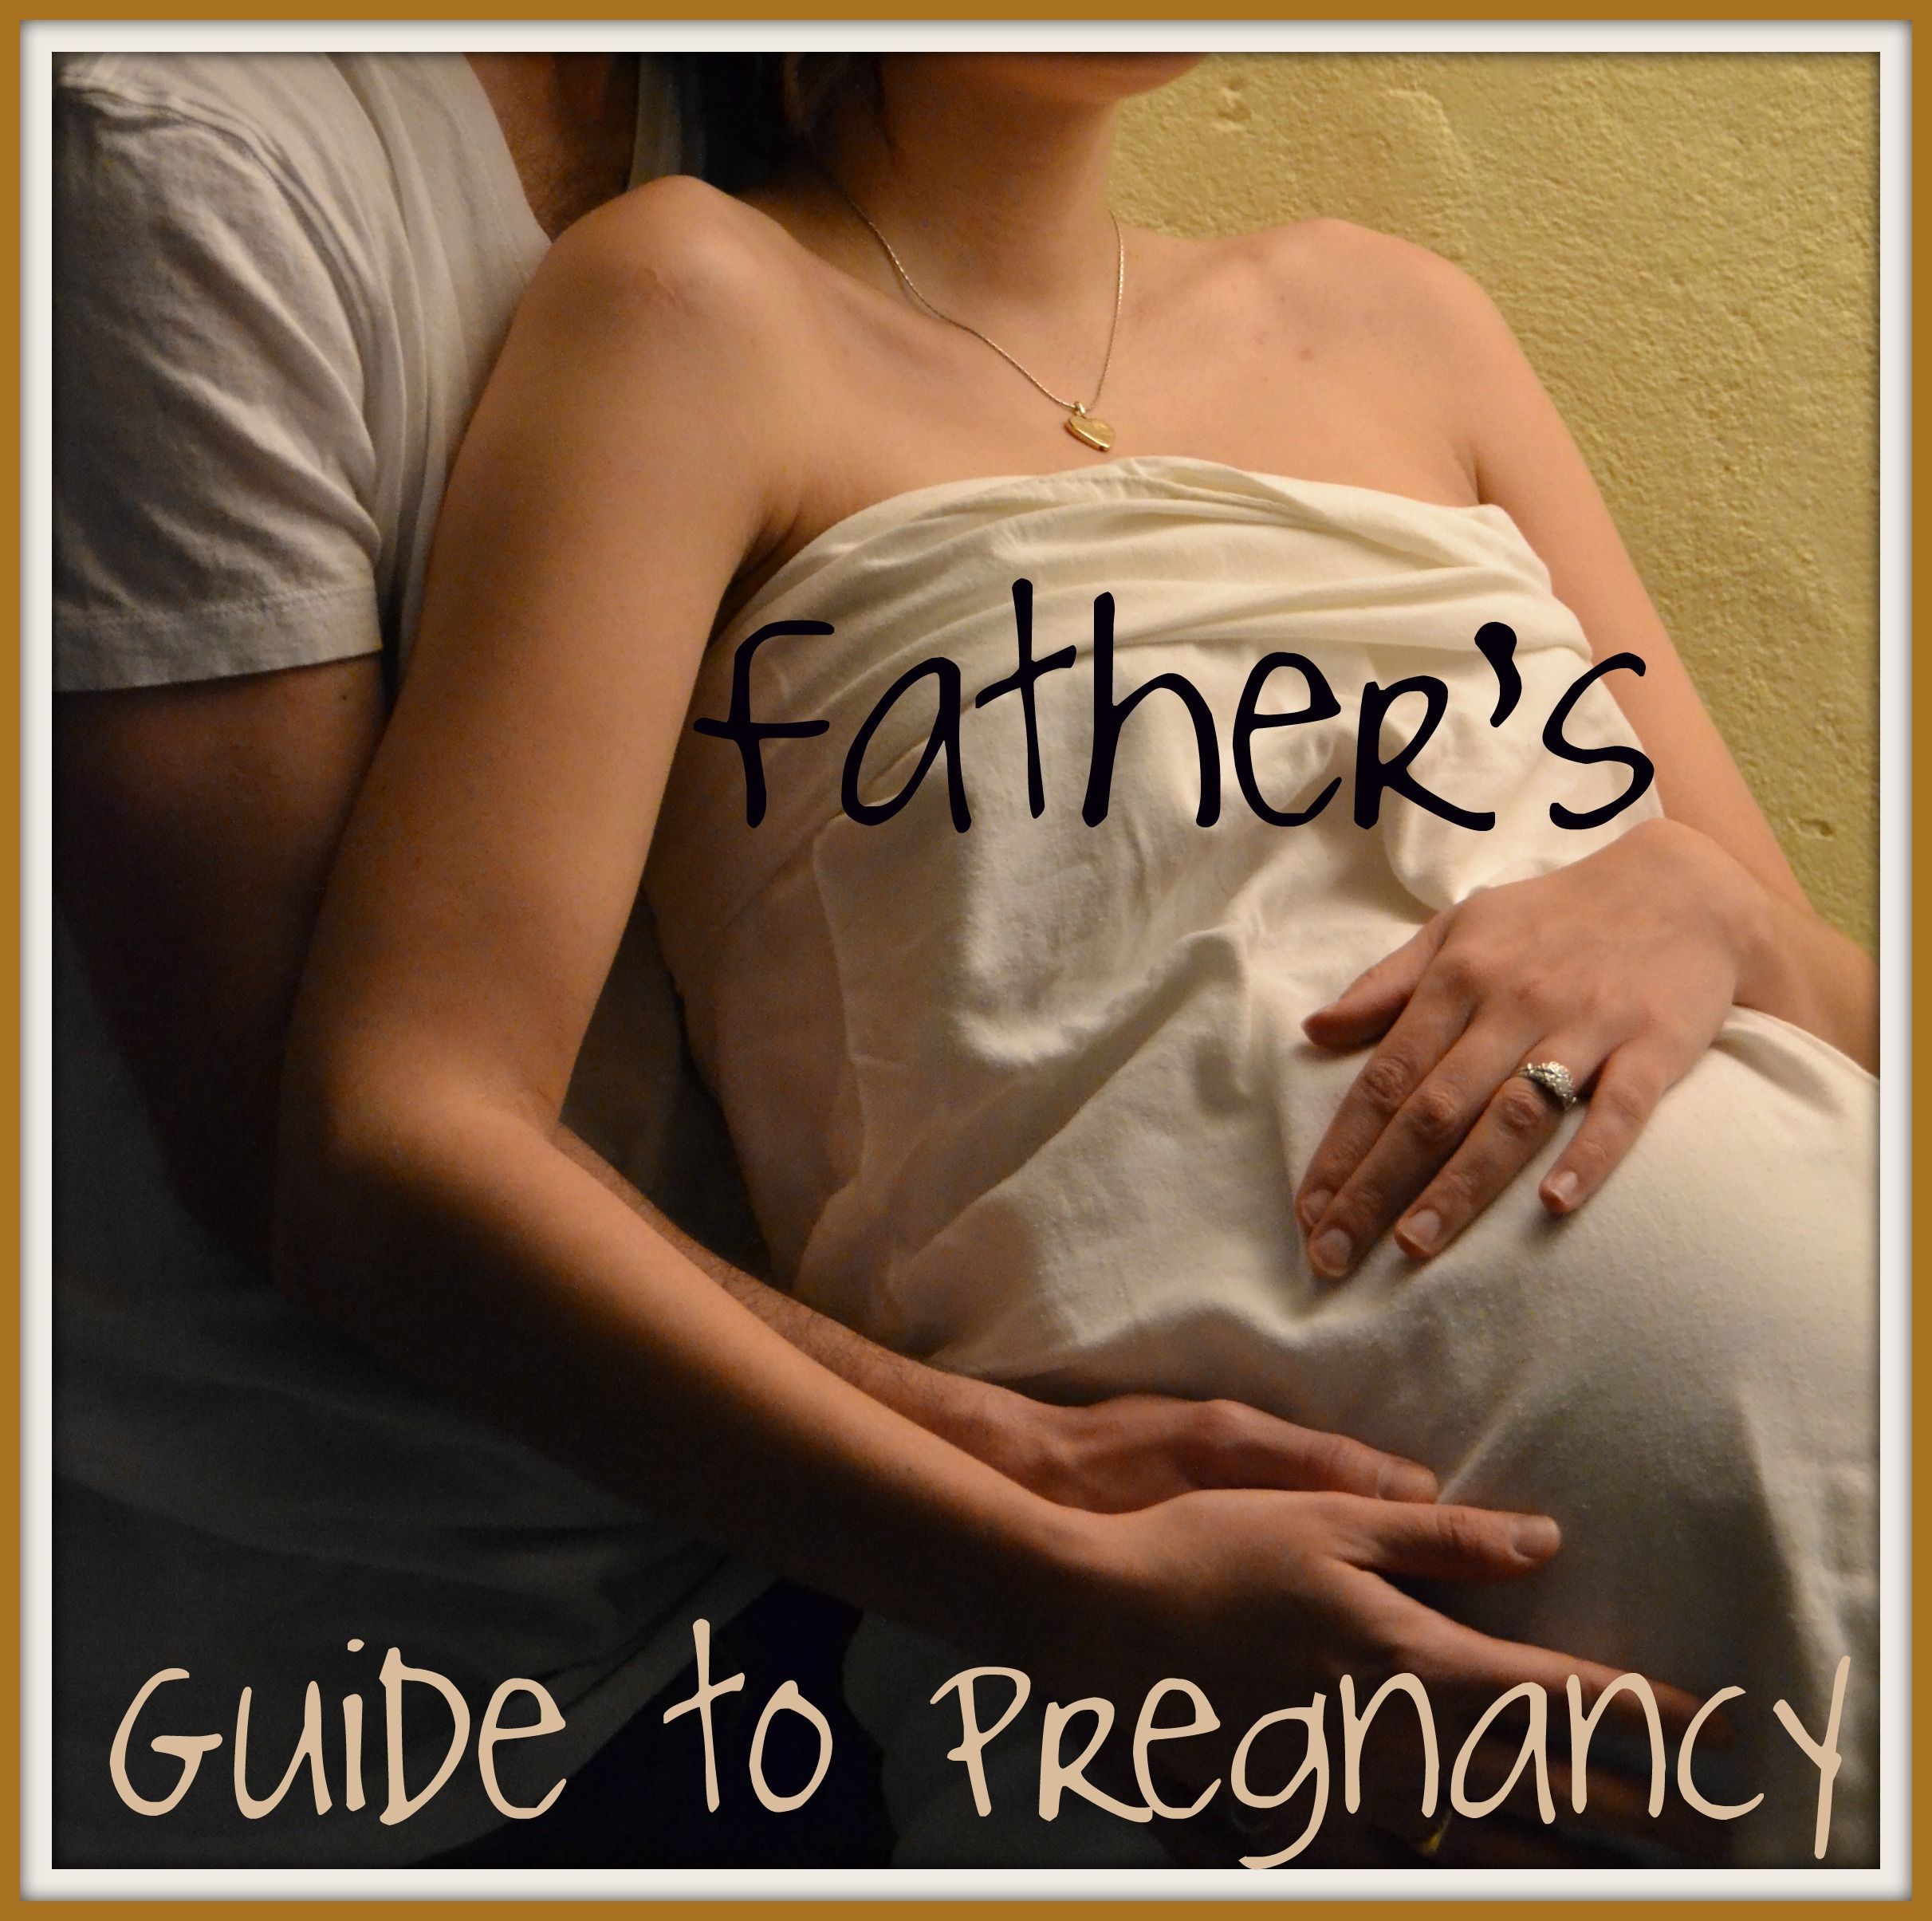 First time dad/father guide: Pregnancy, birth & babies